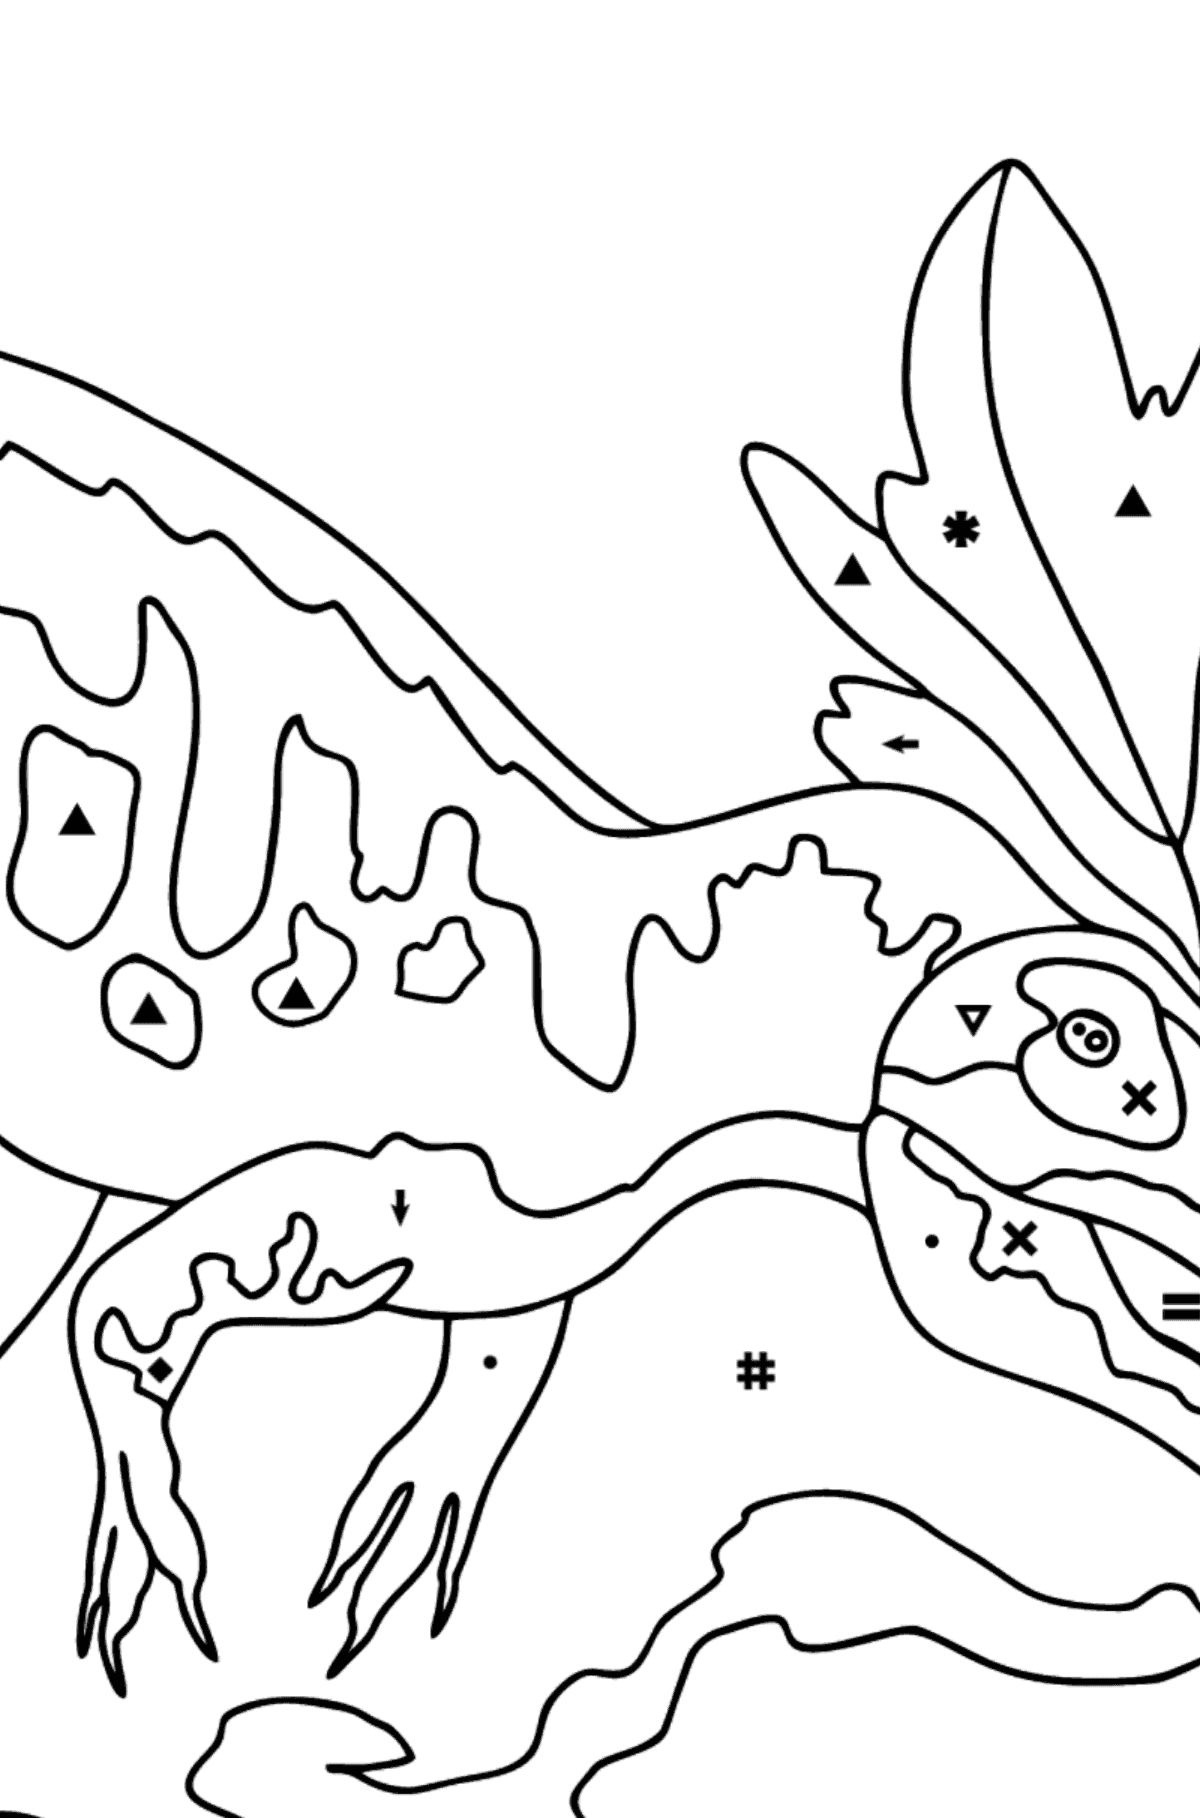 Coloring Page - Allosaurus - A Well-Researched Dinosaur - Coloring by Symbols for Kids